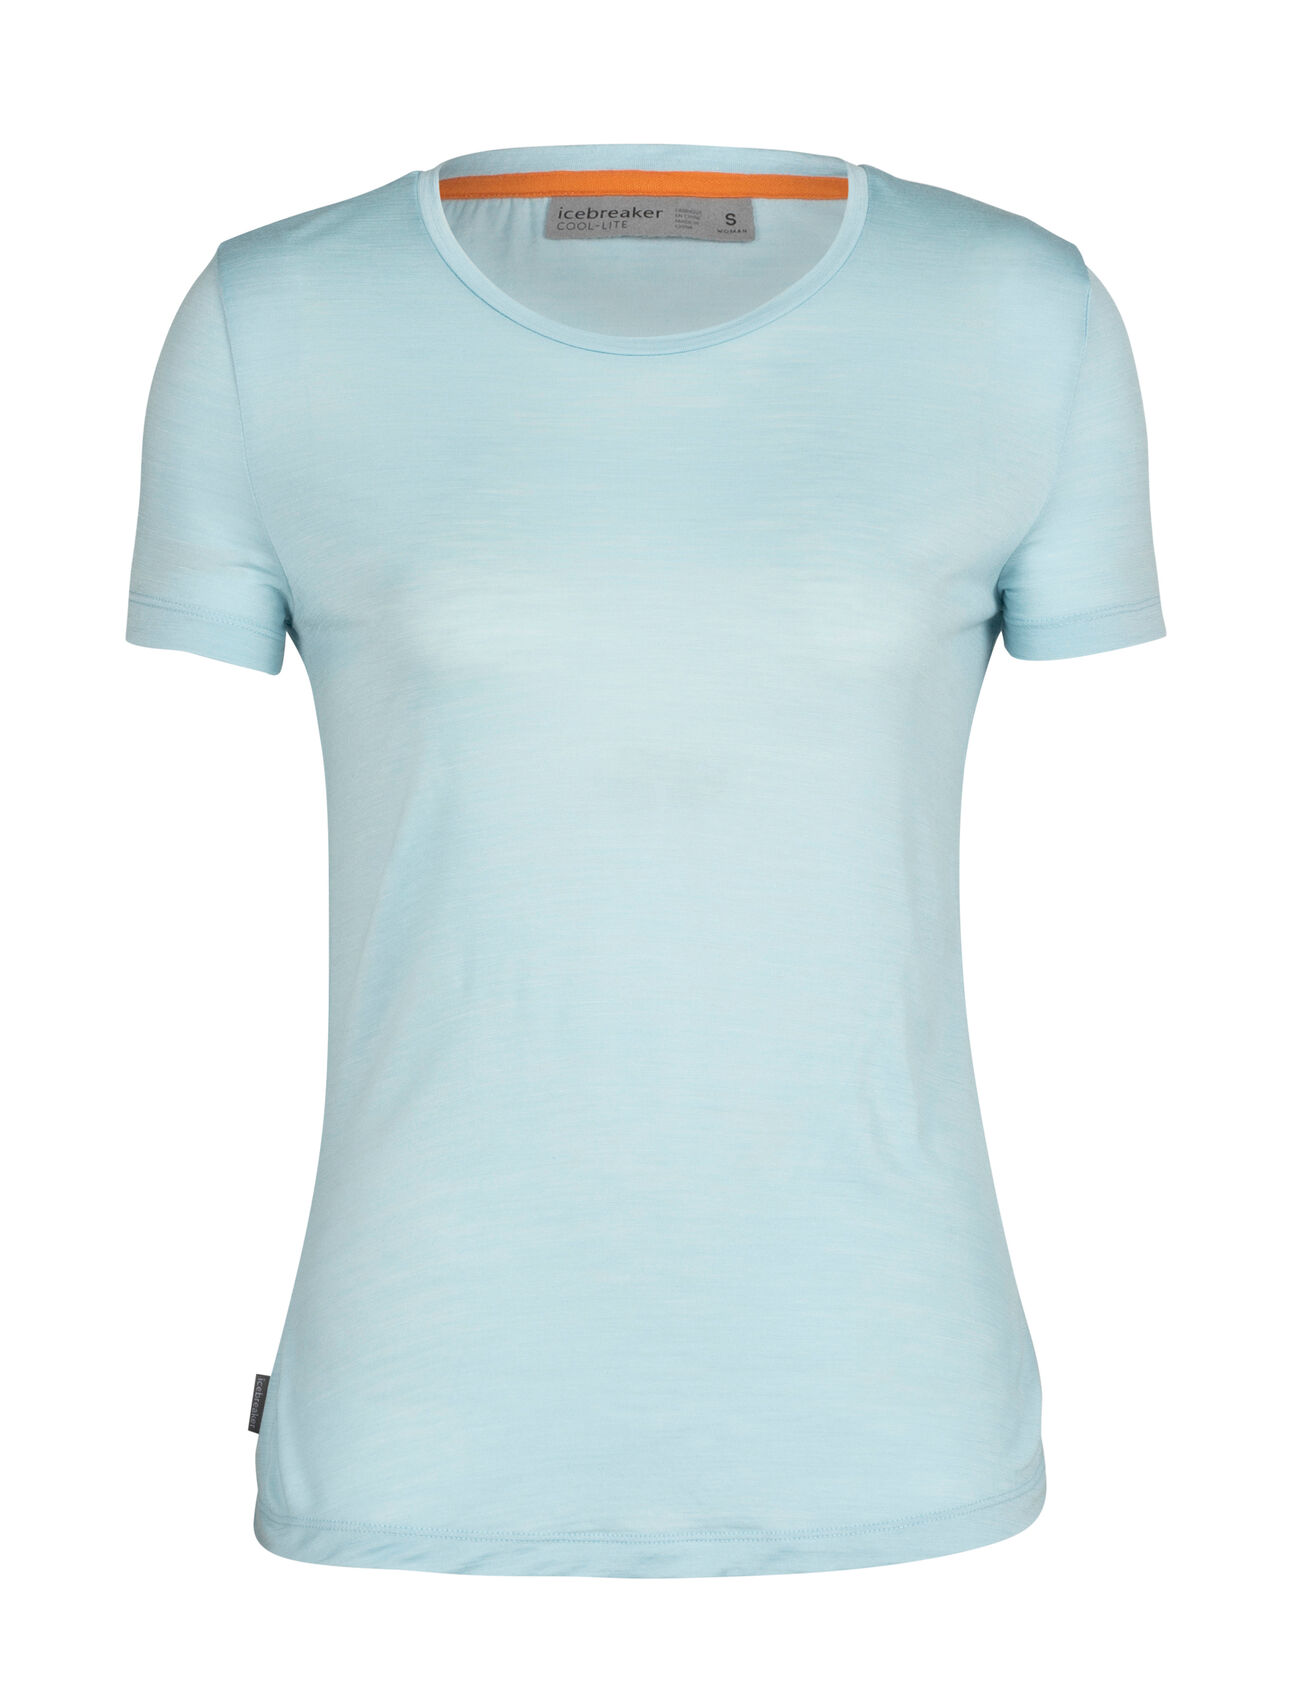 Womens Merino Sphere II Short Sleeve T-Shirt A soft merino-blend tee made with our lightweight Cool-Lite™ jersey fabric, the Sphere II Short Sleeve Tee provides natural breathability, odor resistance and comfort.